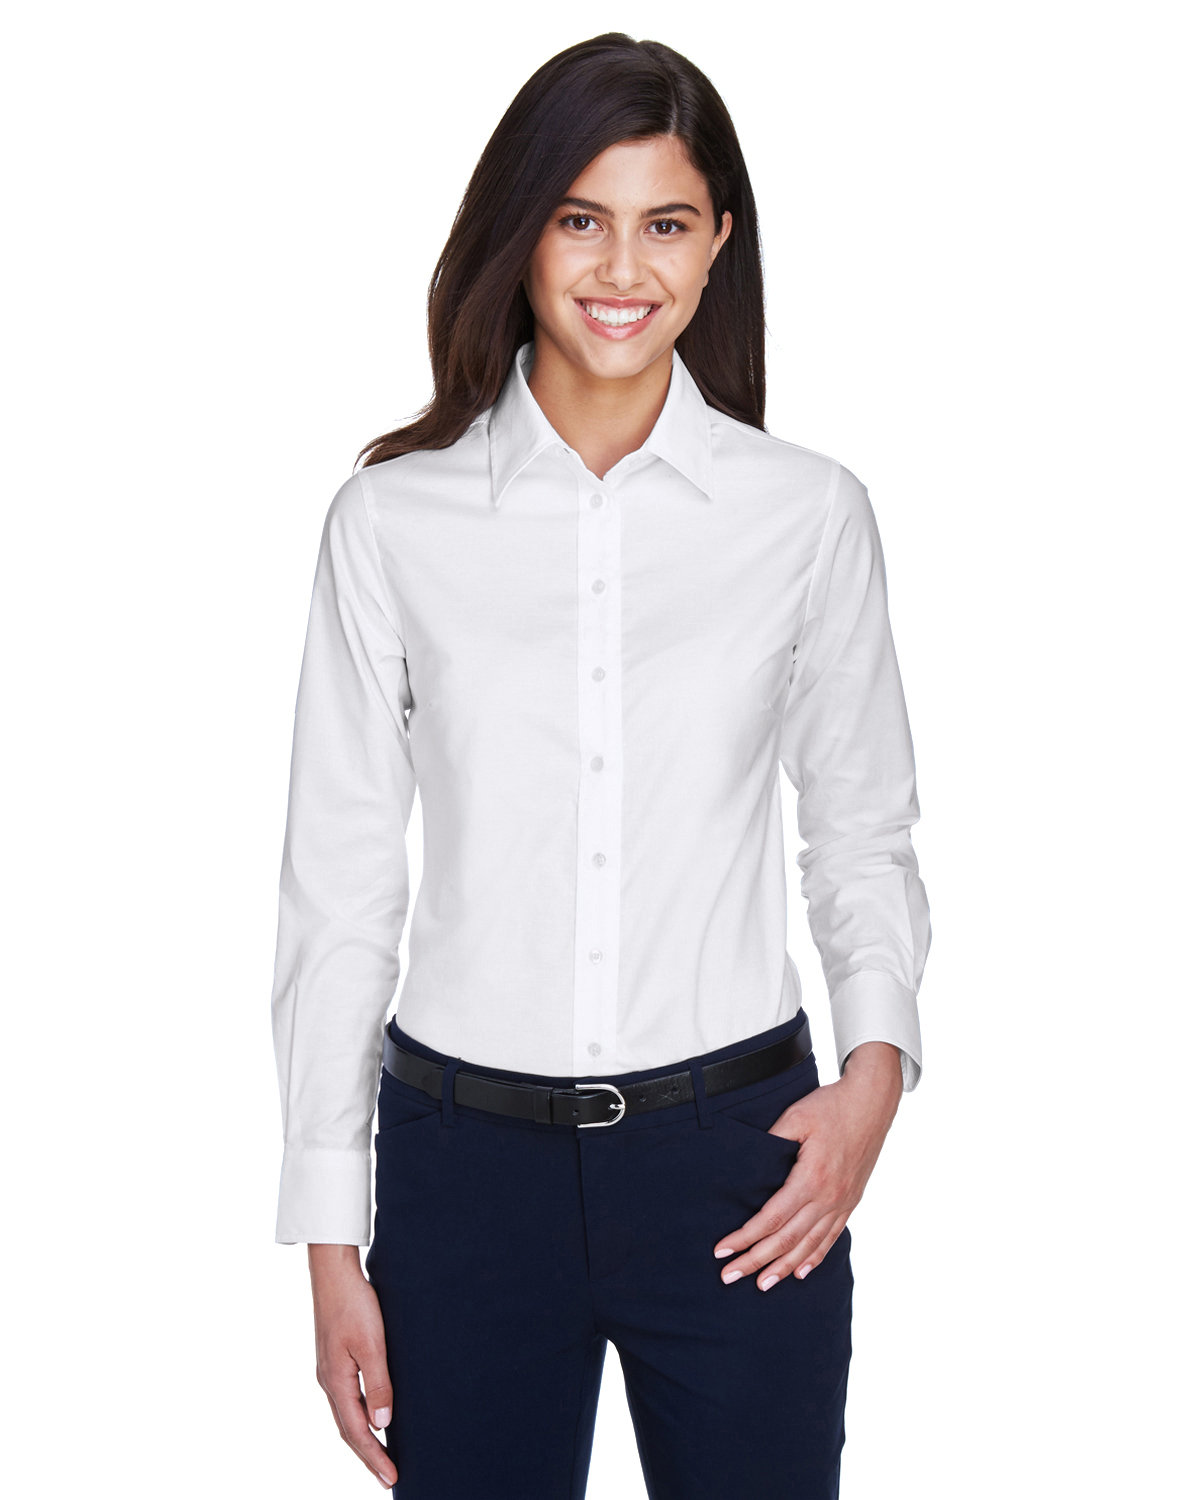 Ladies' Long-Sleeve Oxford with Stain-Release - M600W